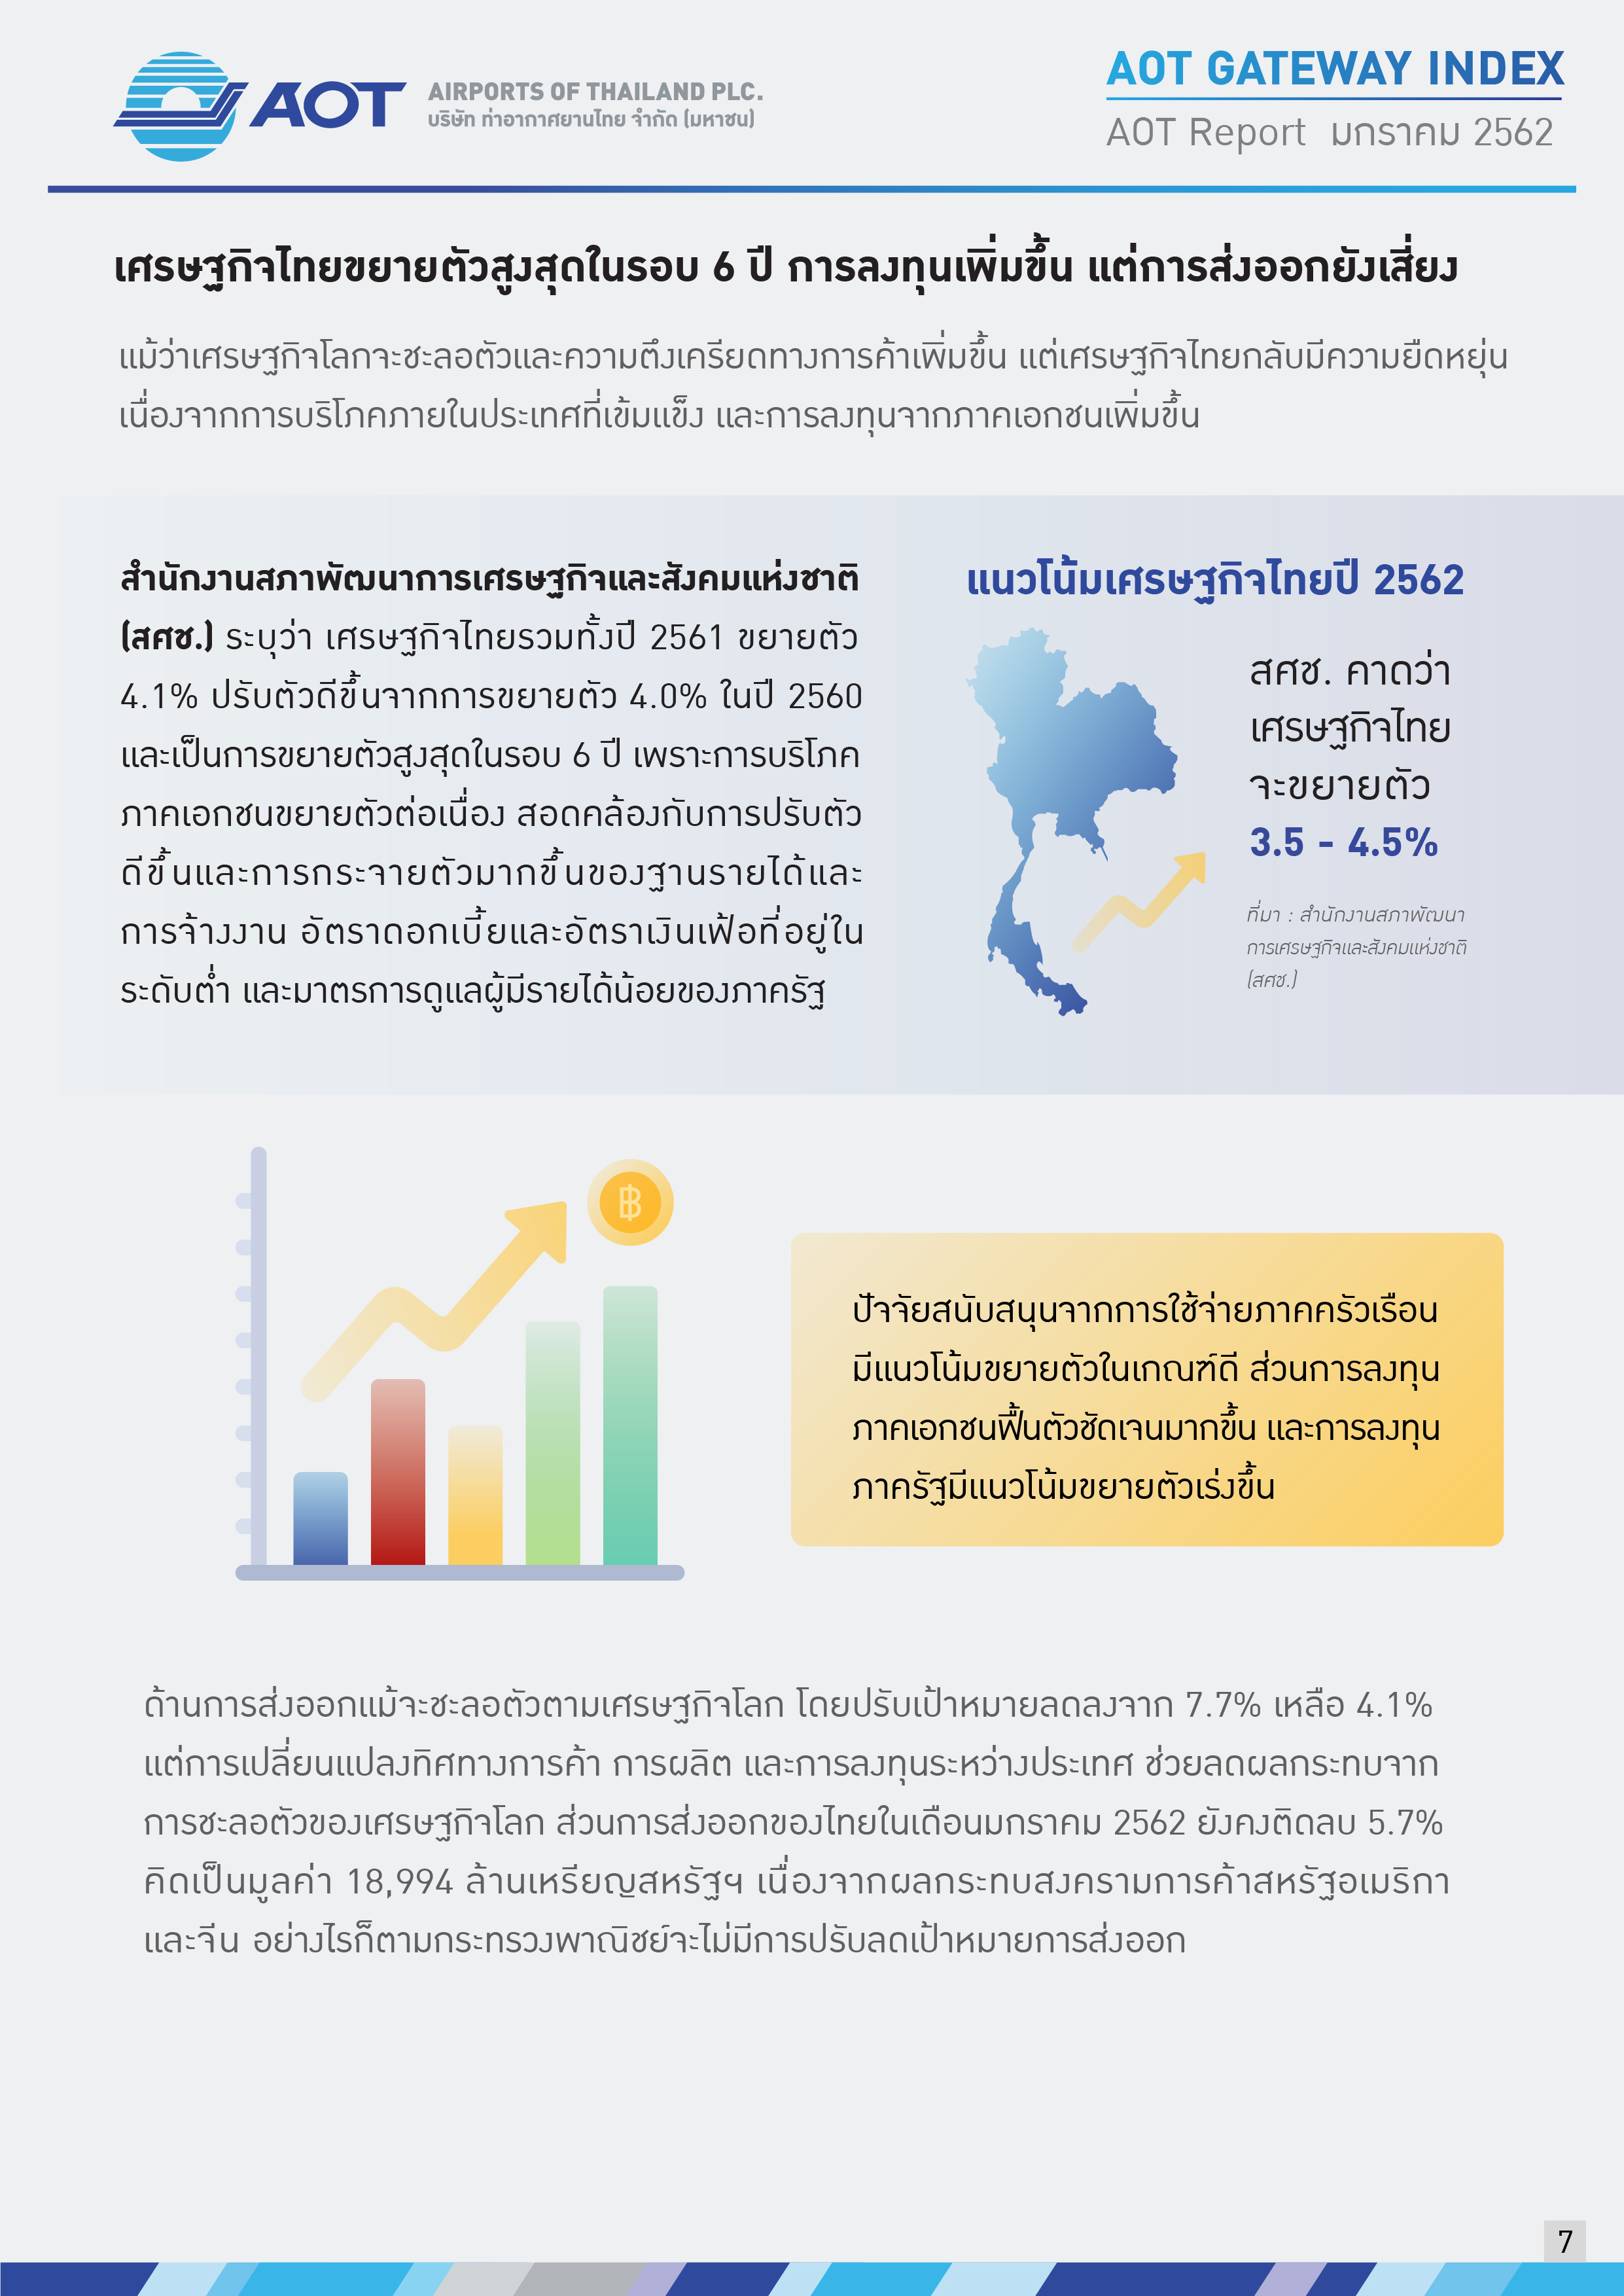 AOTcontent2019_Index_02_เศรษฐกิจโลก_V5_20190401_Page07